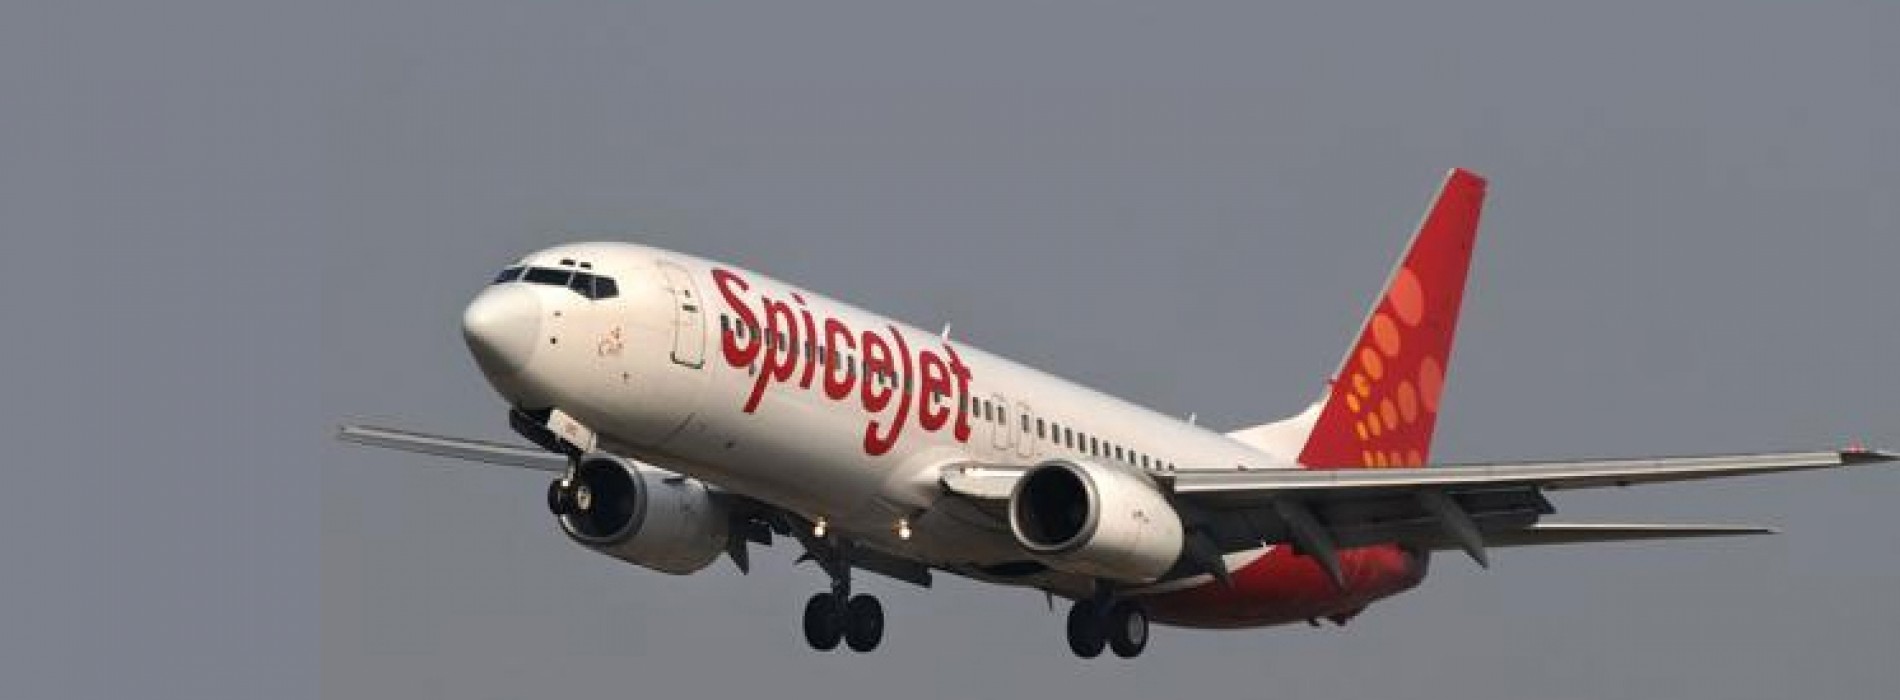 SpiceJet to Start Flight Service to Bangkok from Coimbatore